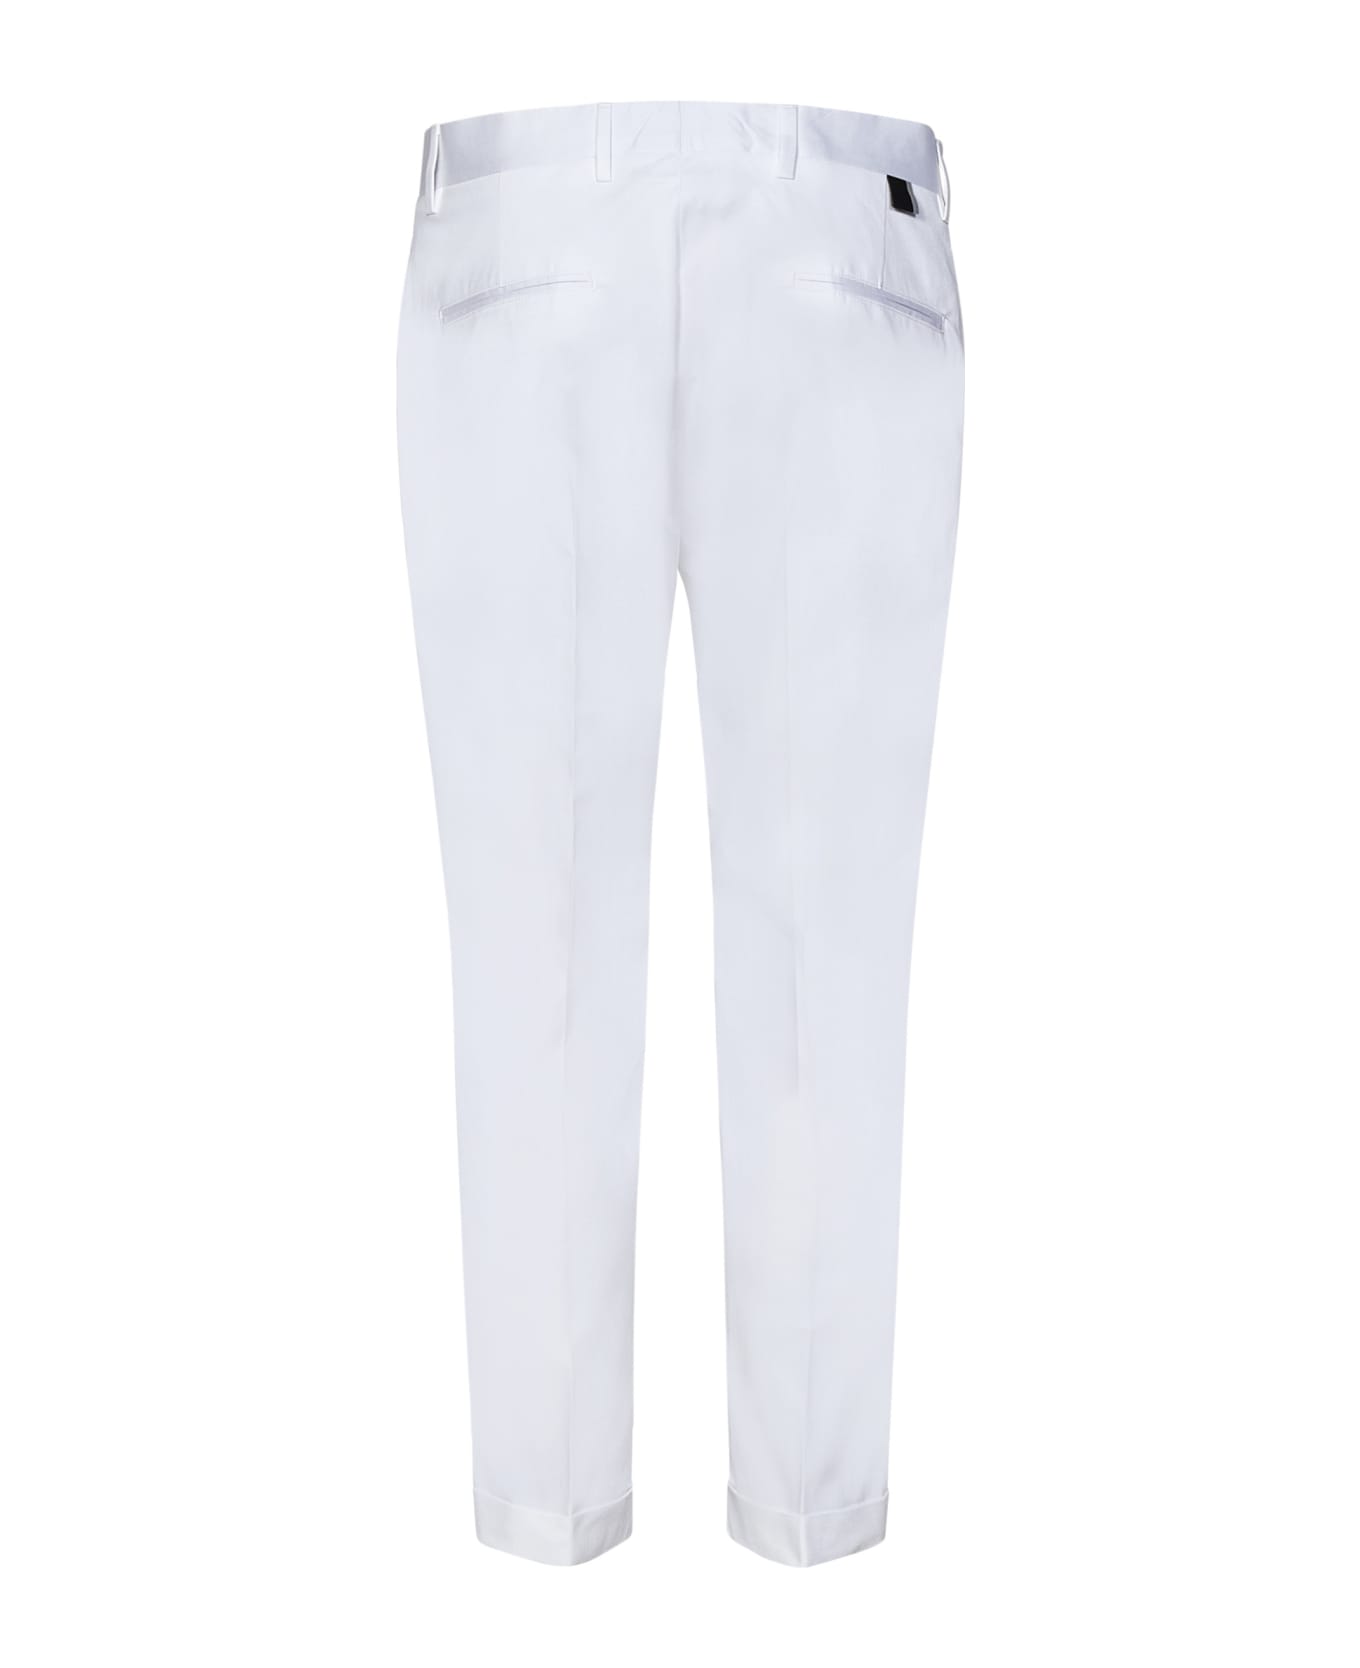 Low Brand Cooper T1.7 Trousers - White